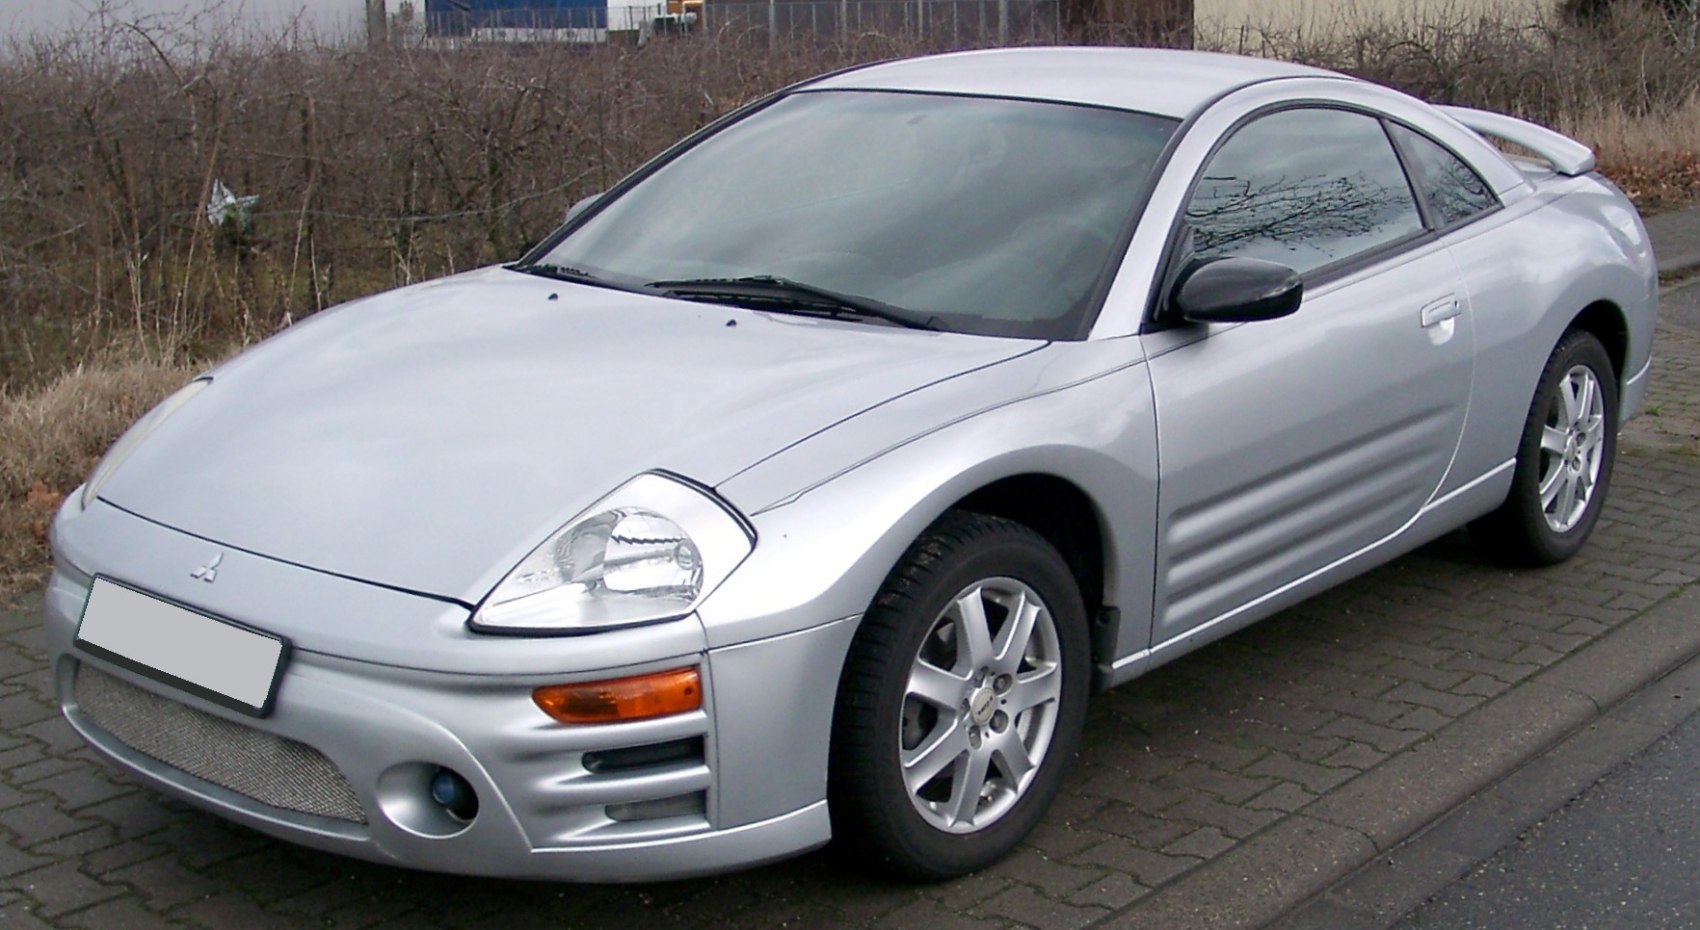 https://totalrenting.es/wp-content/uploads/2022/10/mitsubishi-eclipse-iii-3g-facelift-2003-2003-2-4-147-cv-coupe-liftback.png